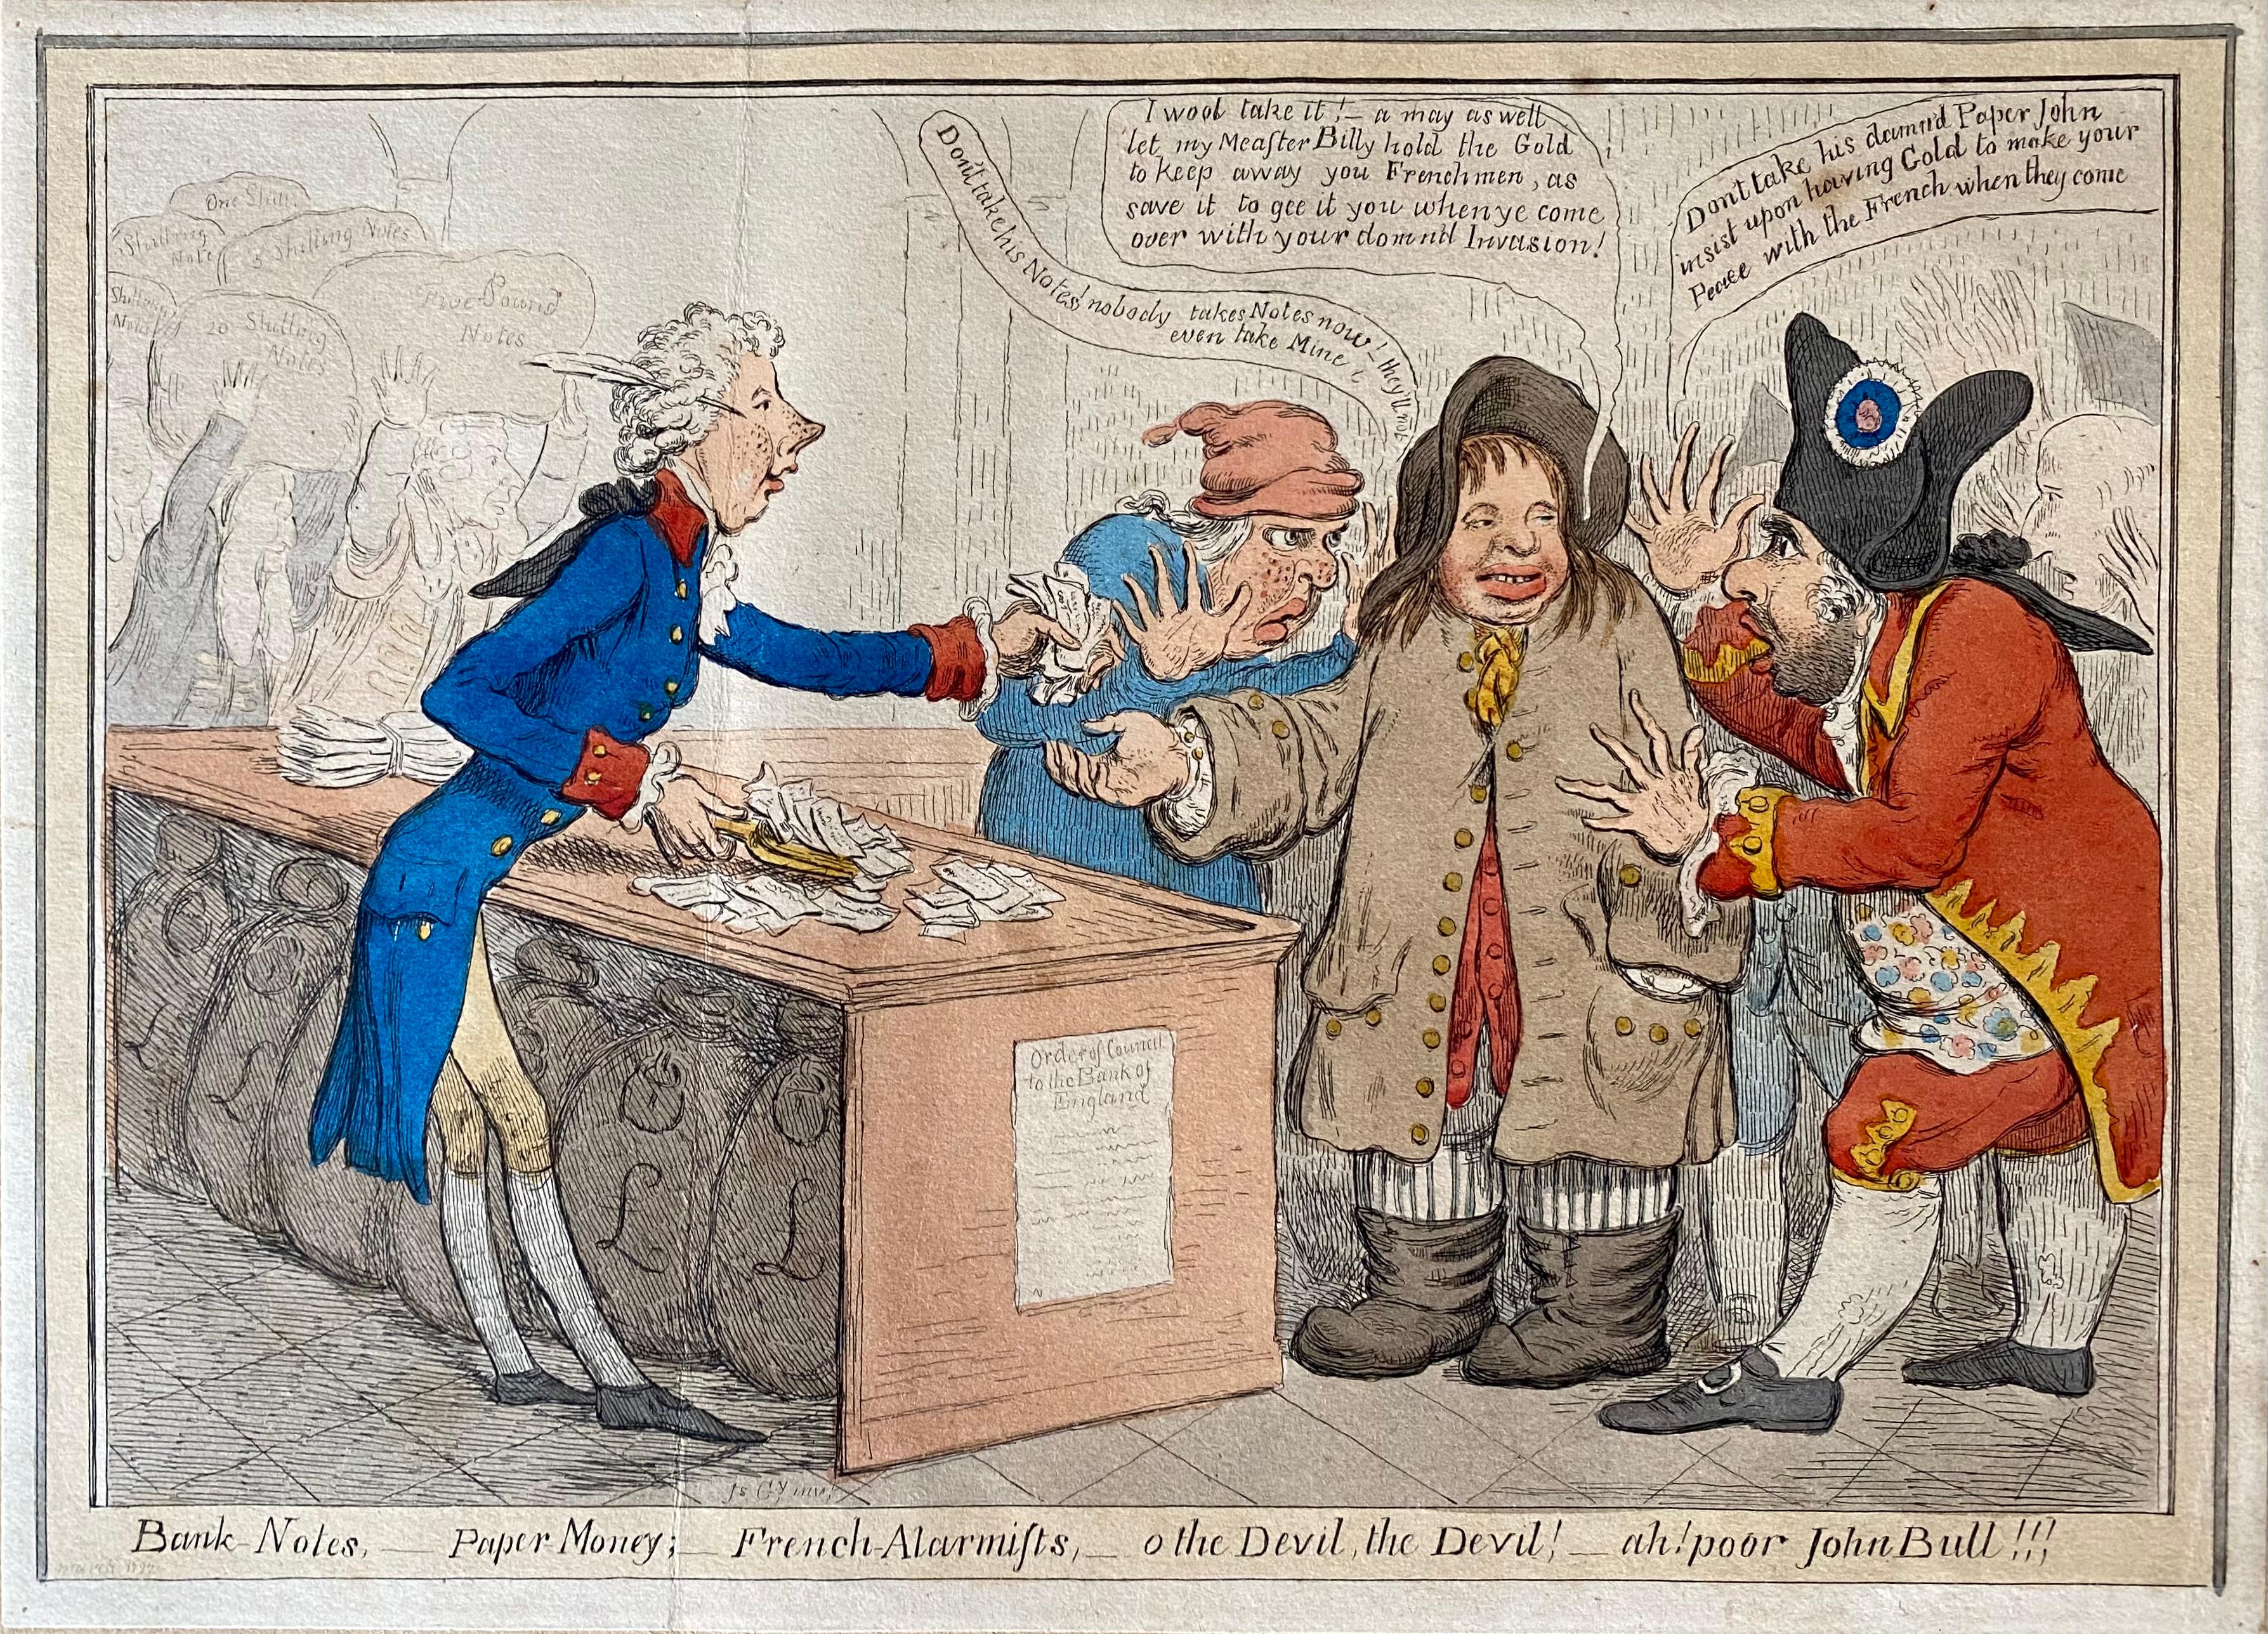 

James Gillray (13 August 1756 – 1 June 1815) was a British caricaturist and printmaker famous for his etched political and social satires, mainly published between 1792 and 1810. Many of his works are held at the National Portrait Gallery in